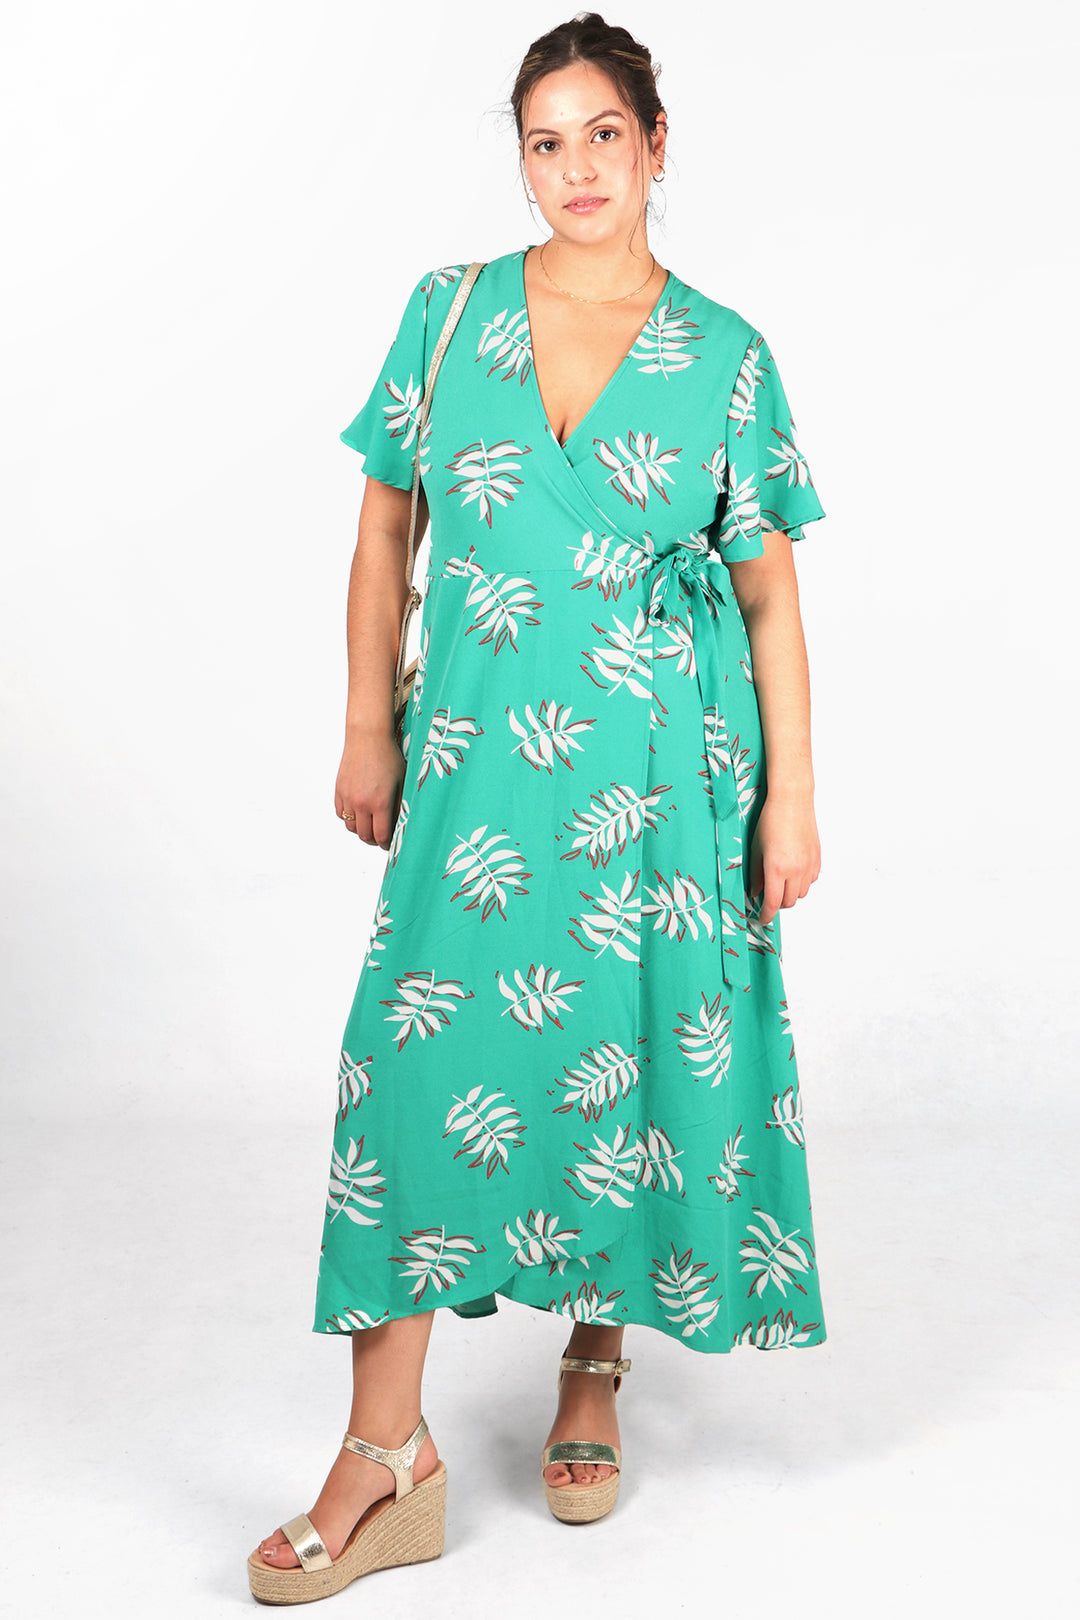 model wearing green short sleeved wrap dress with a whitea and coral palm leaf pattern all over